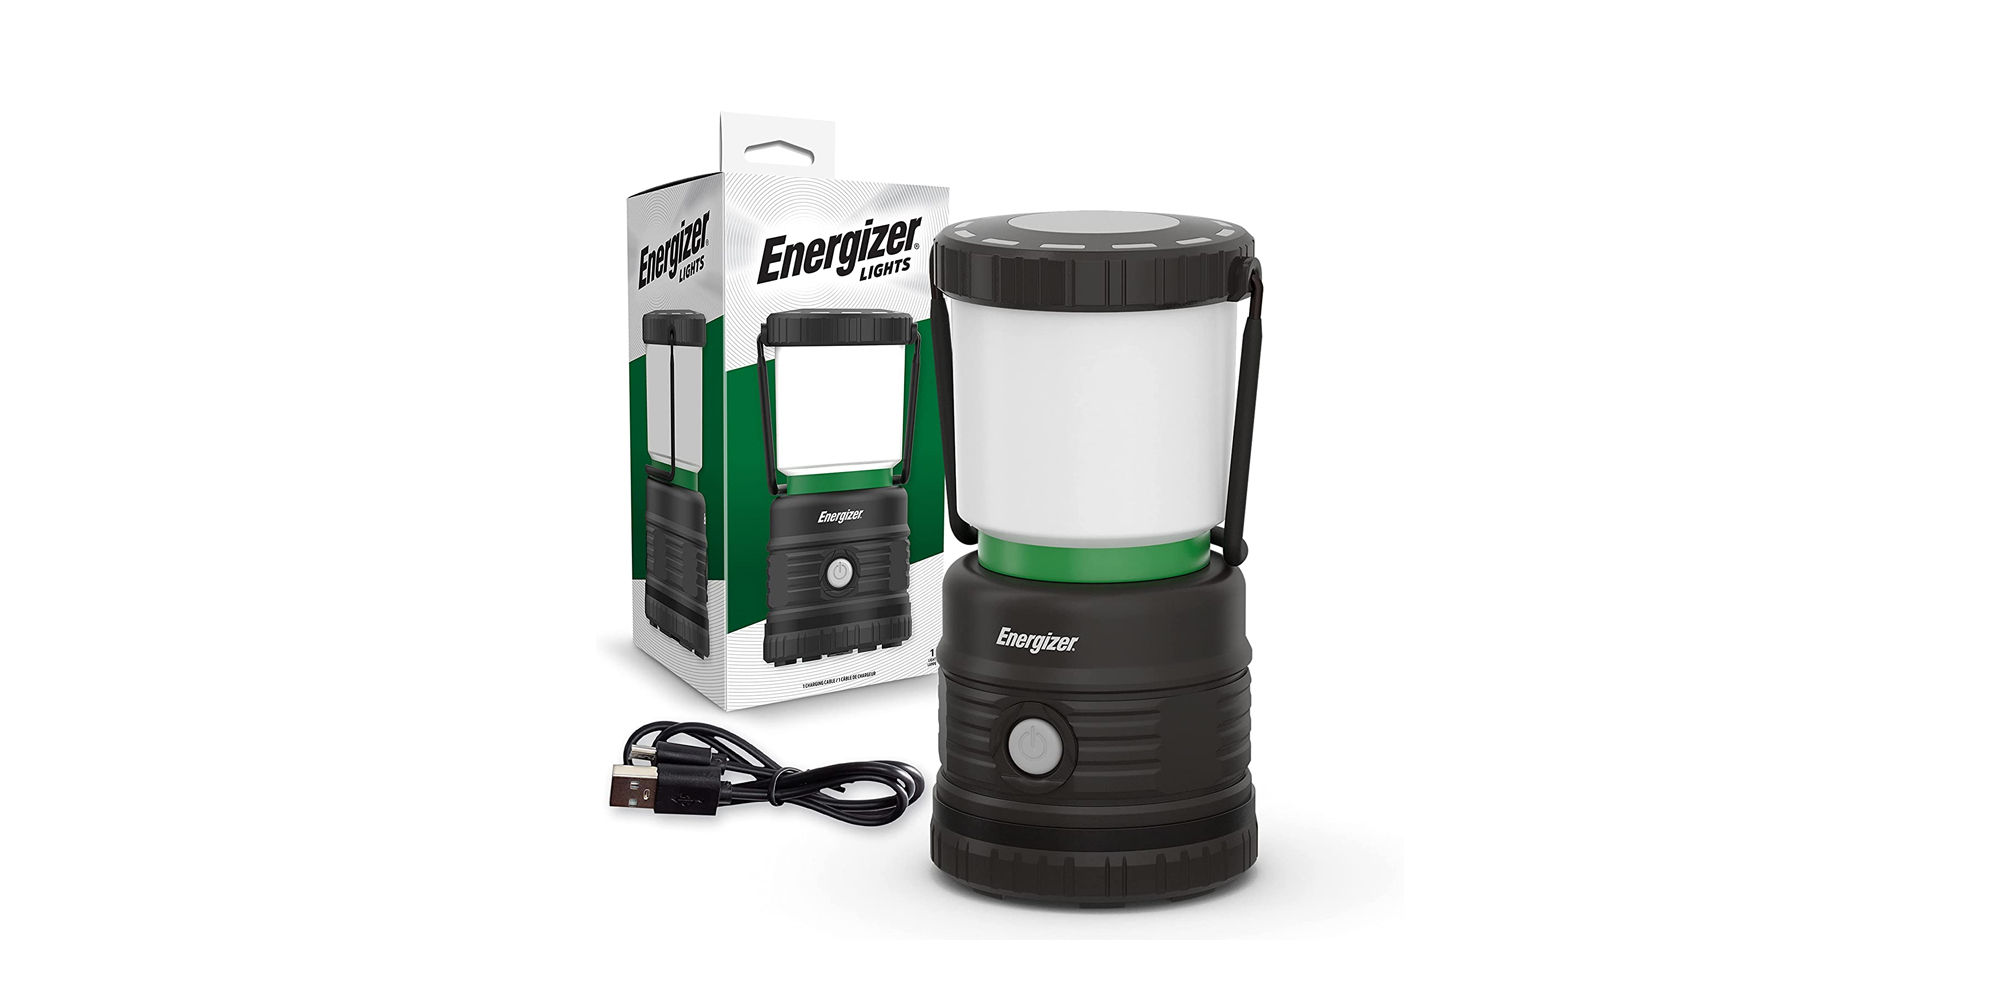 Save 50% on Energizer's Rechargeable 1,000-lumen LED Lantern with